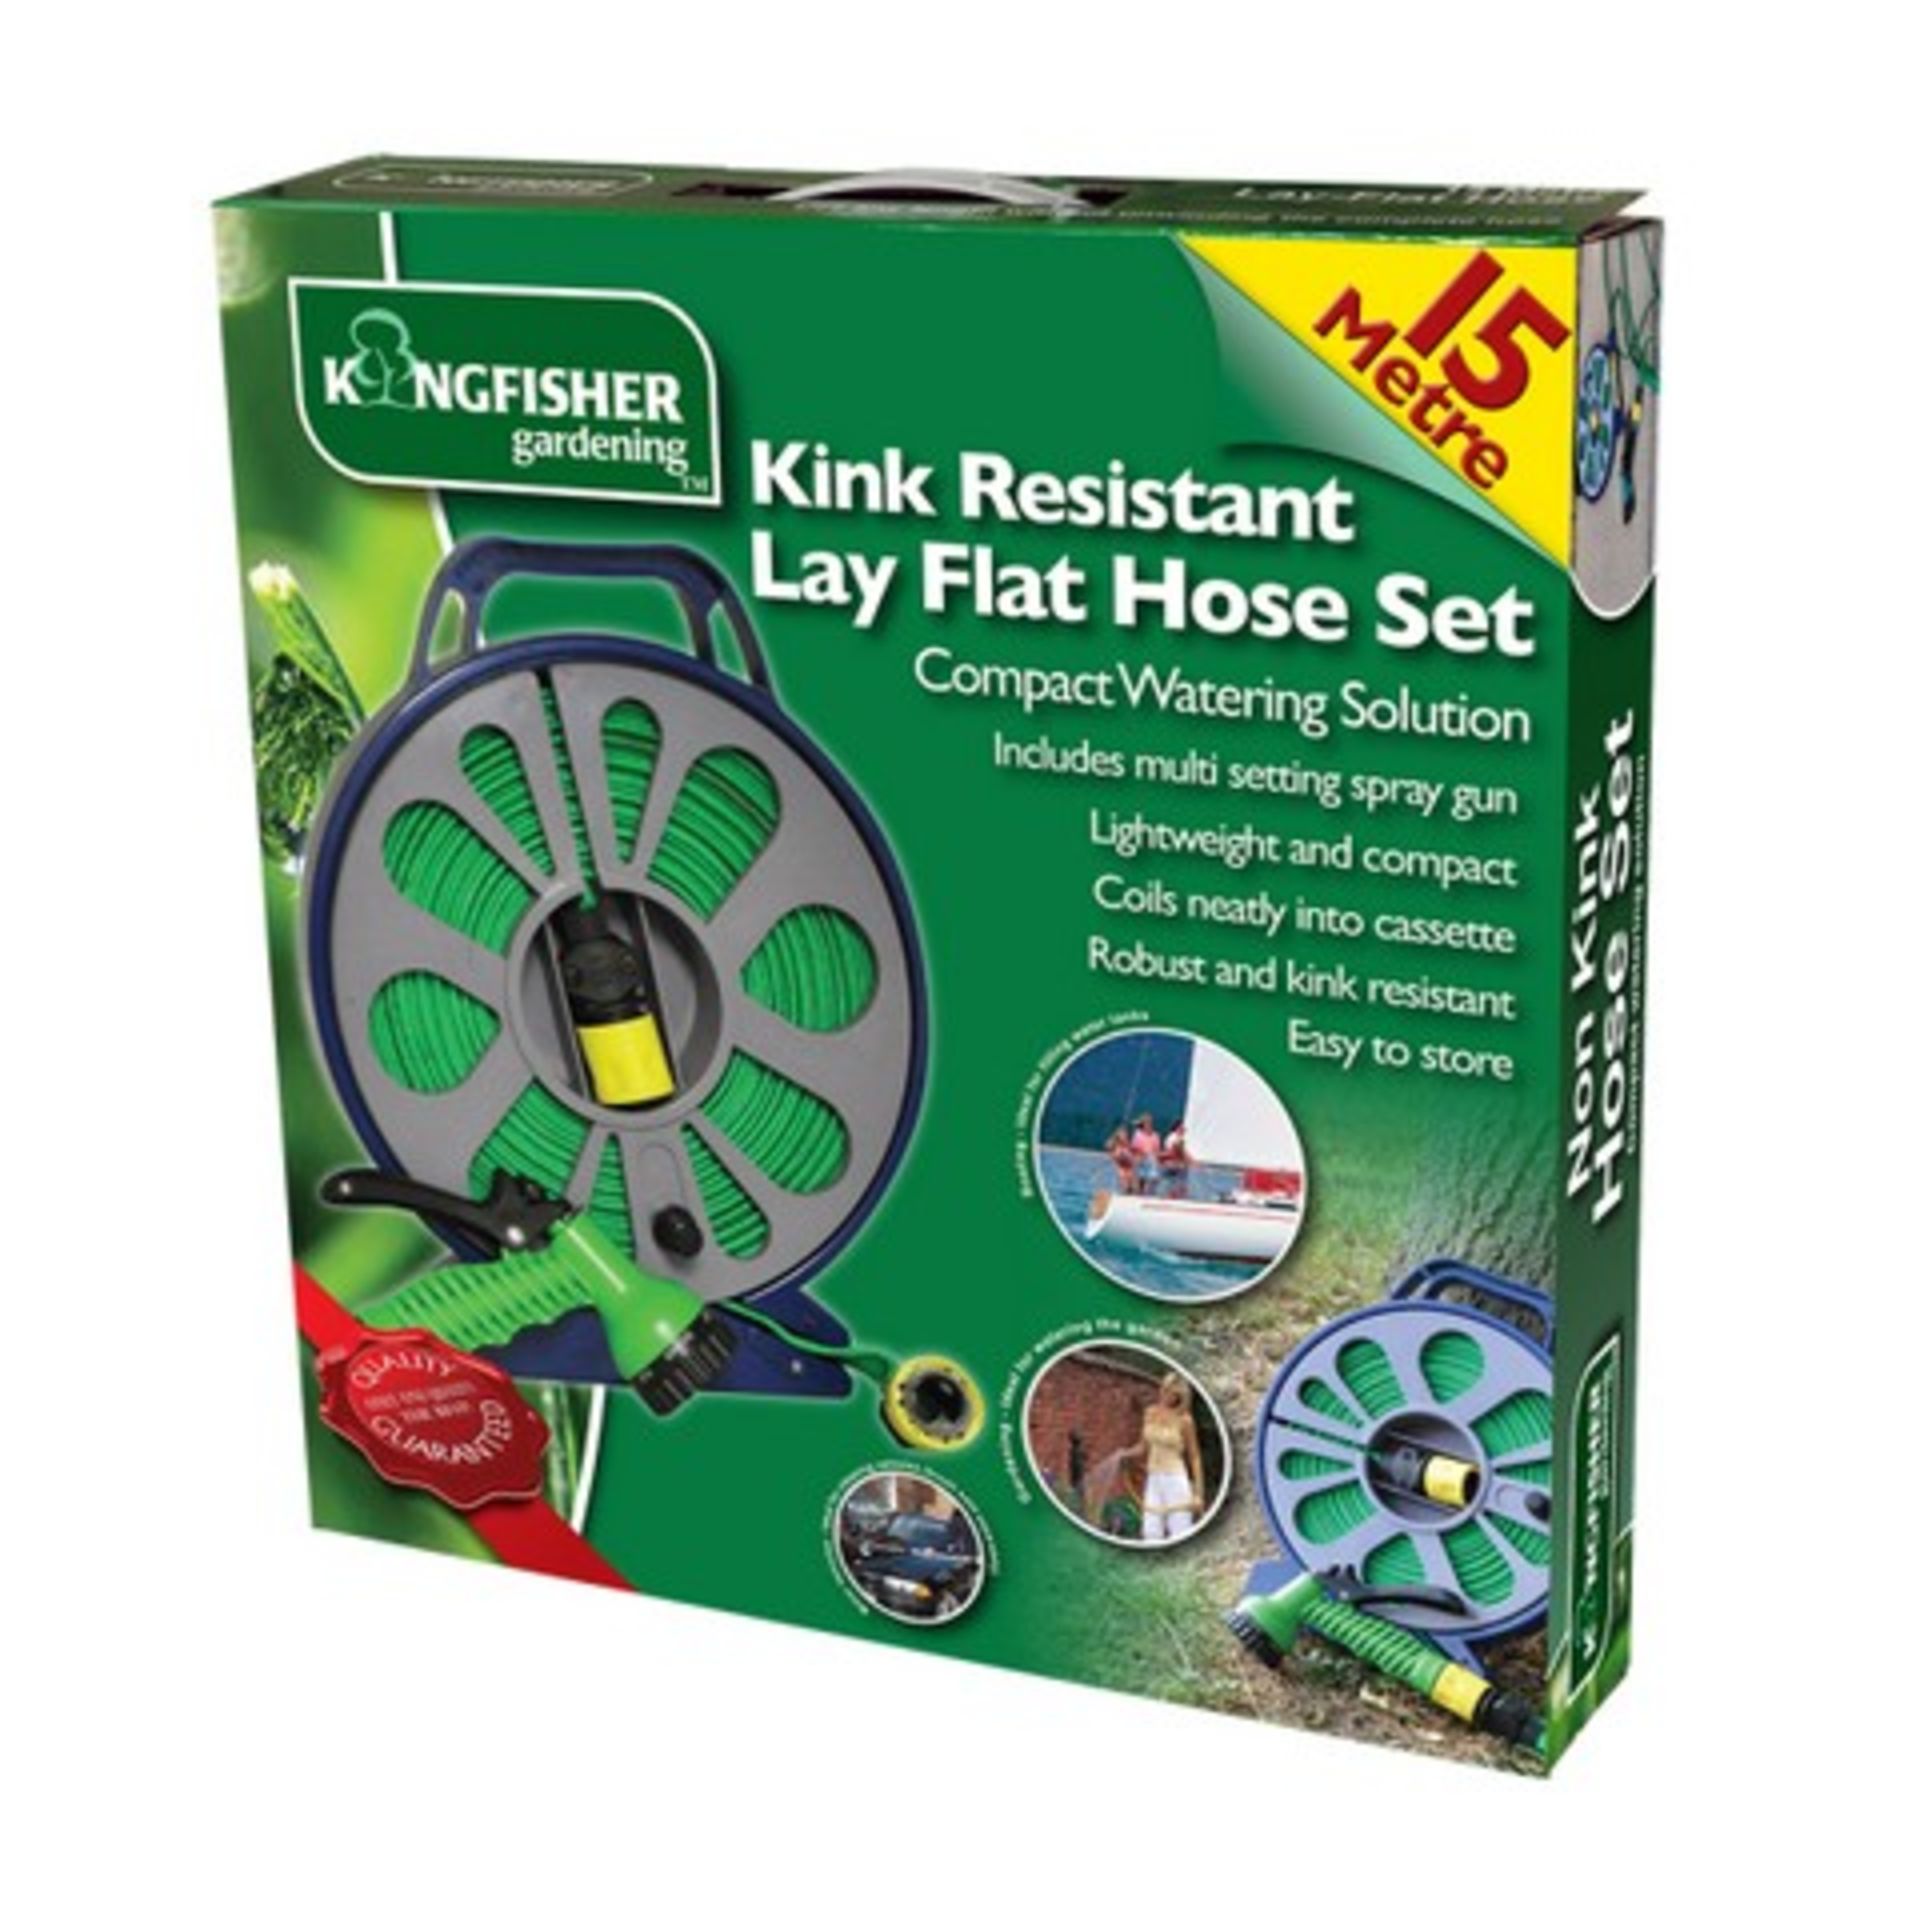 V Brand New Kink Resistant Lay Flat Hose Set 15 metres (approx) With Multi-Setting Spray Gun - - Image 2 of 2